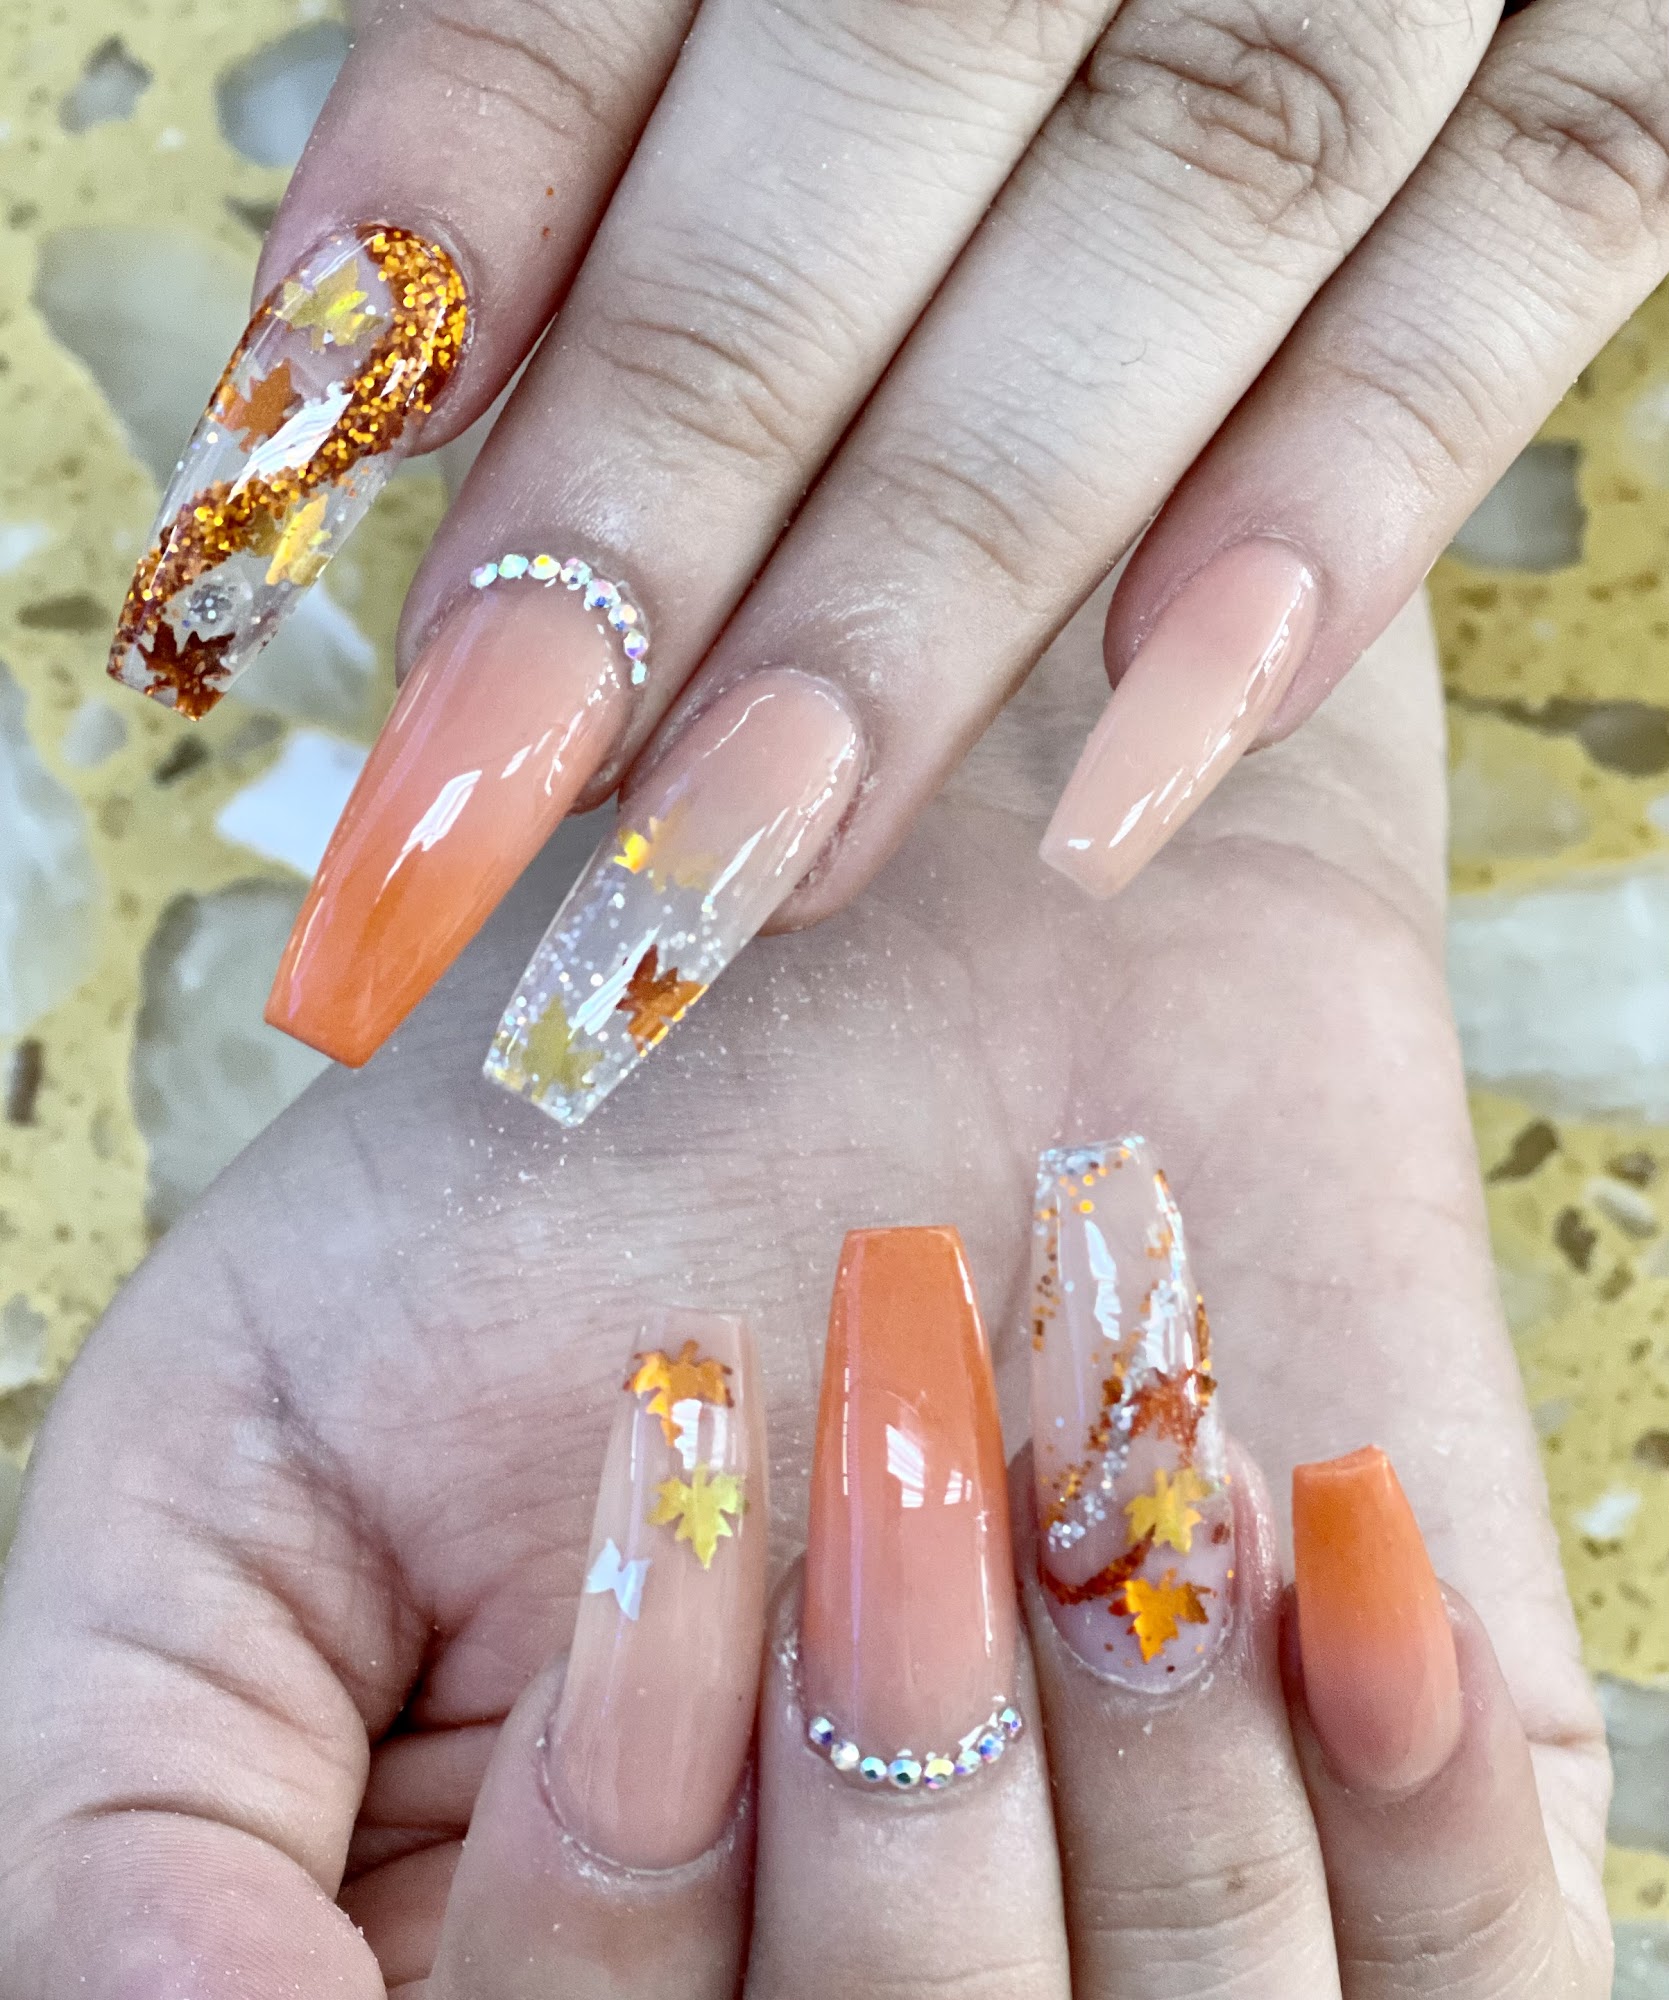 Happy nails & spa We located next to Bingo hall and around the church’s chicken, 11915 Lake June Rd a, Balch Springs Texas 75180